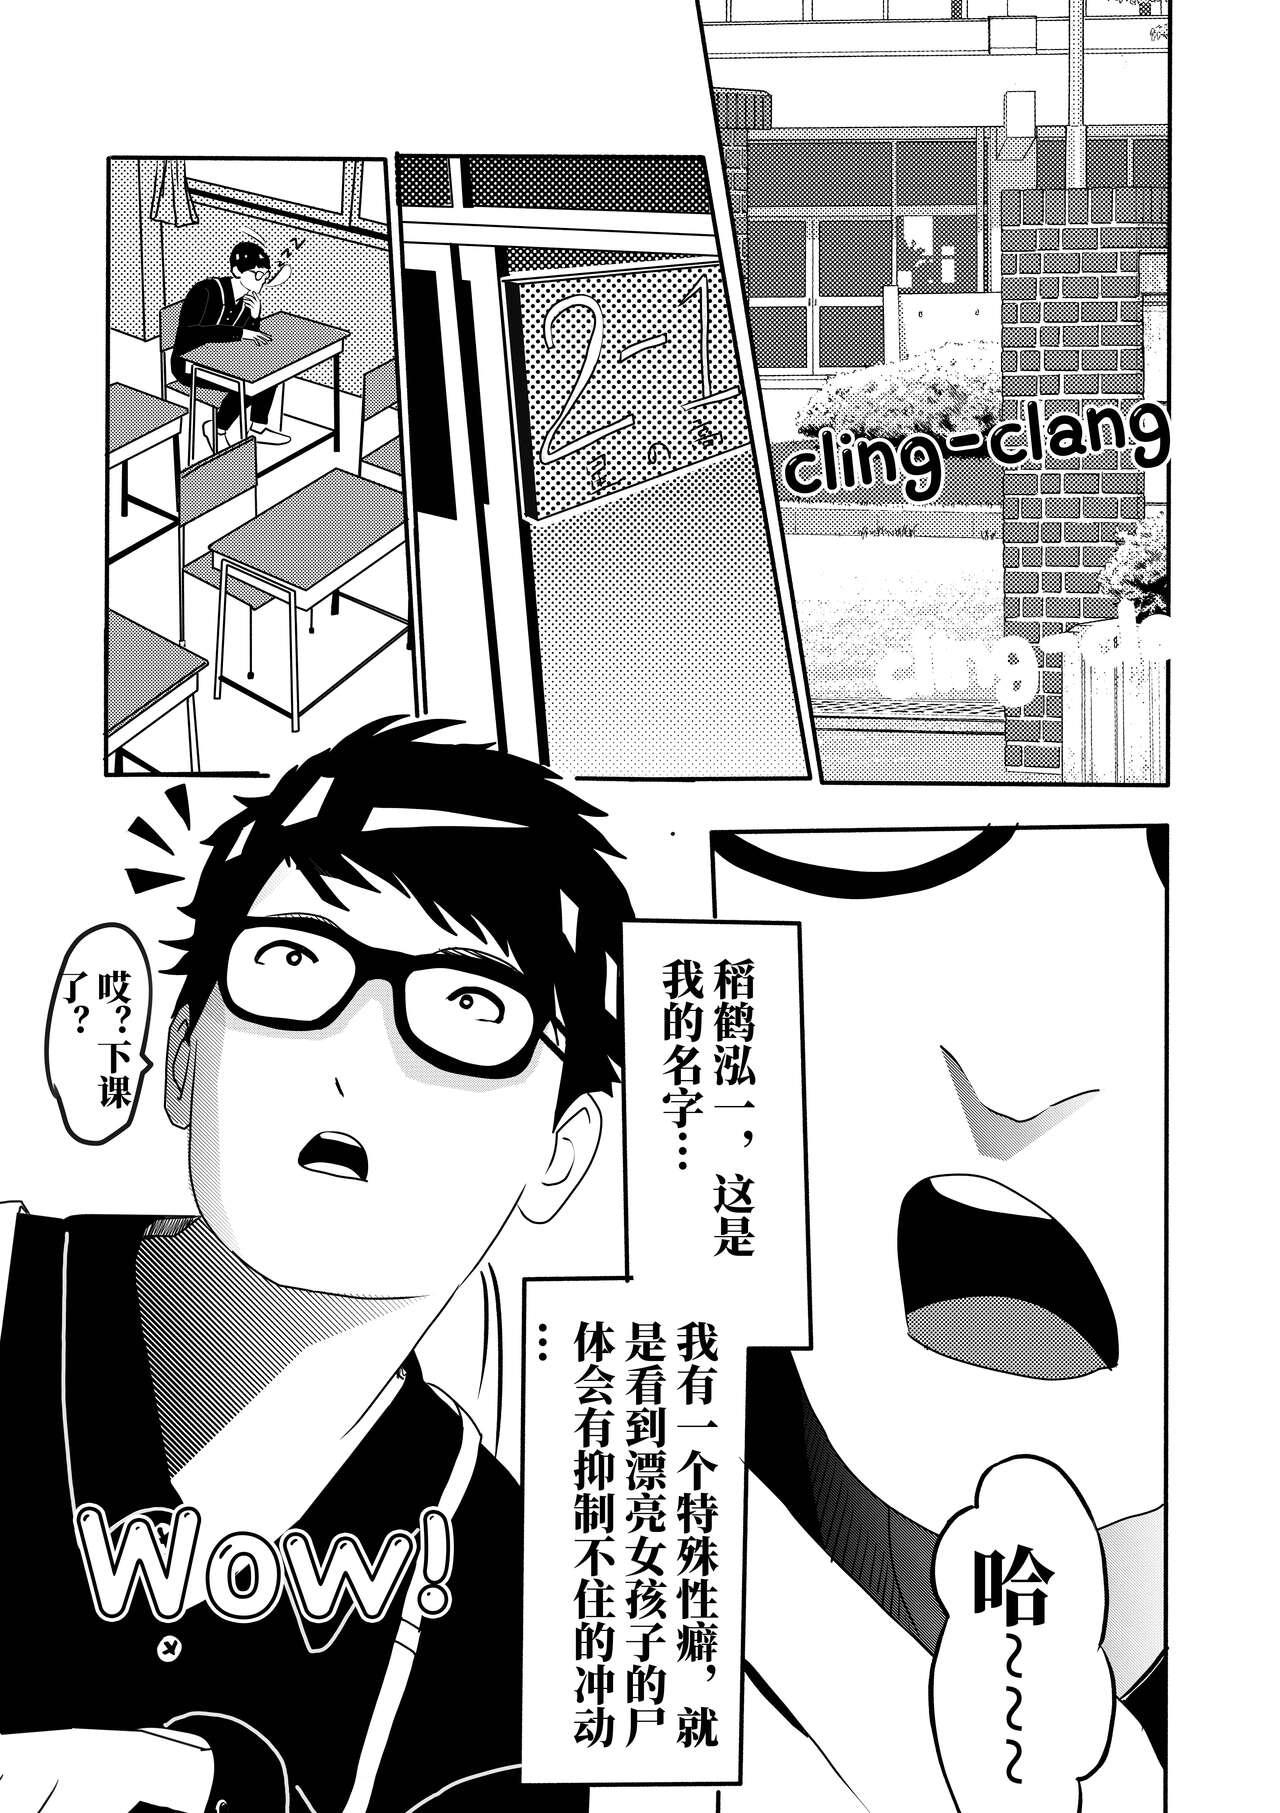 Hidden Camera [KAO.YELLOW STUDIO (T.C.X)] I must be out of my mind to fall in love with SAORI, the Snuff Queen Ch.1-16 | 想与冰恋女王纱织同学谈恋爱的我脑子一定有问题 第1-16话 [Chinese] - Original Old And Young - Page 3